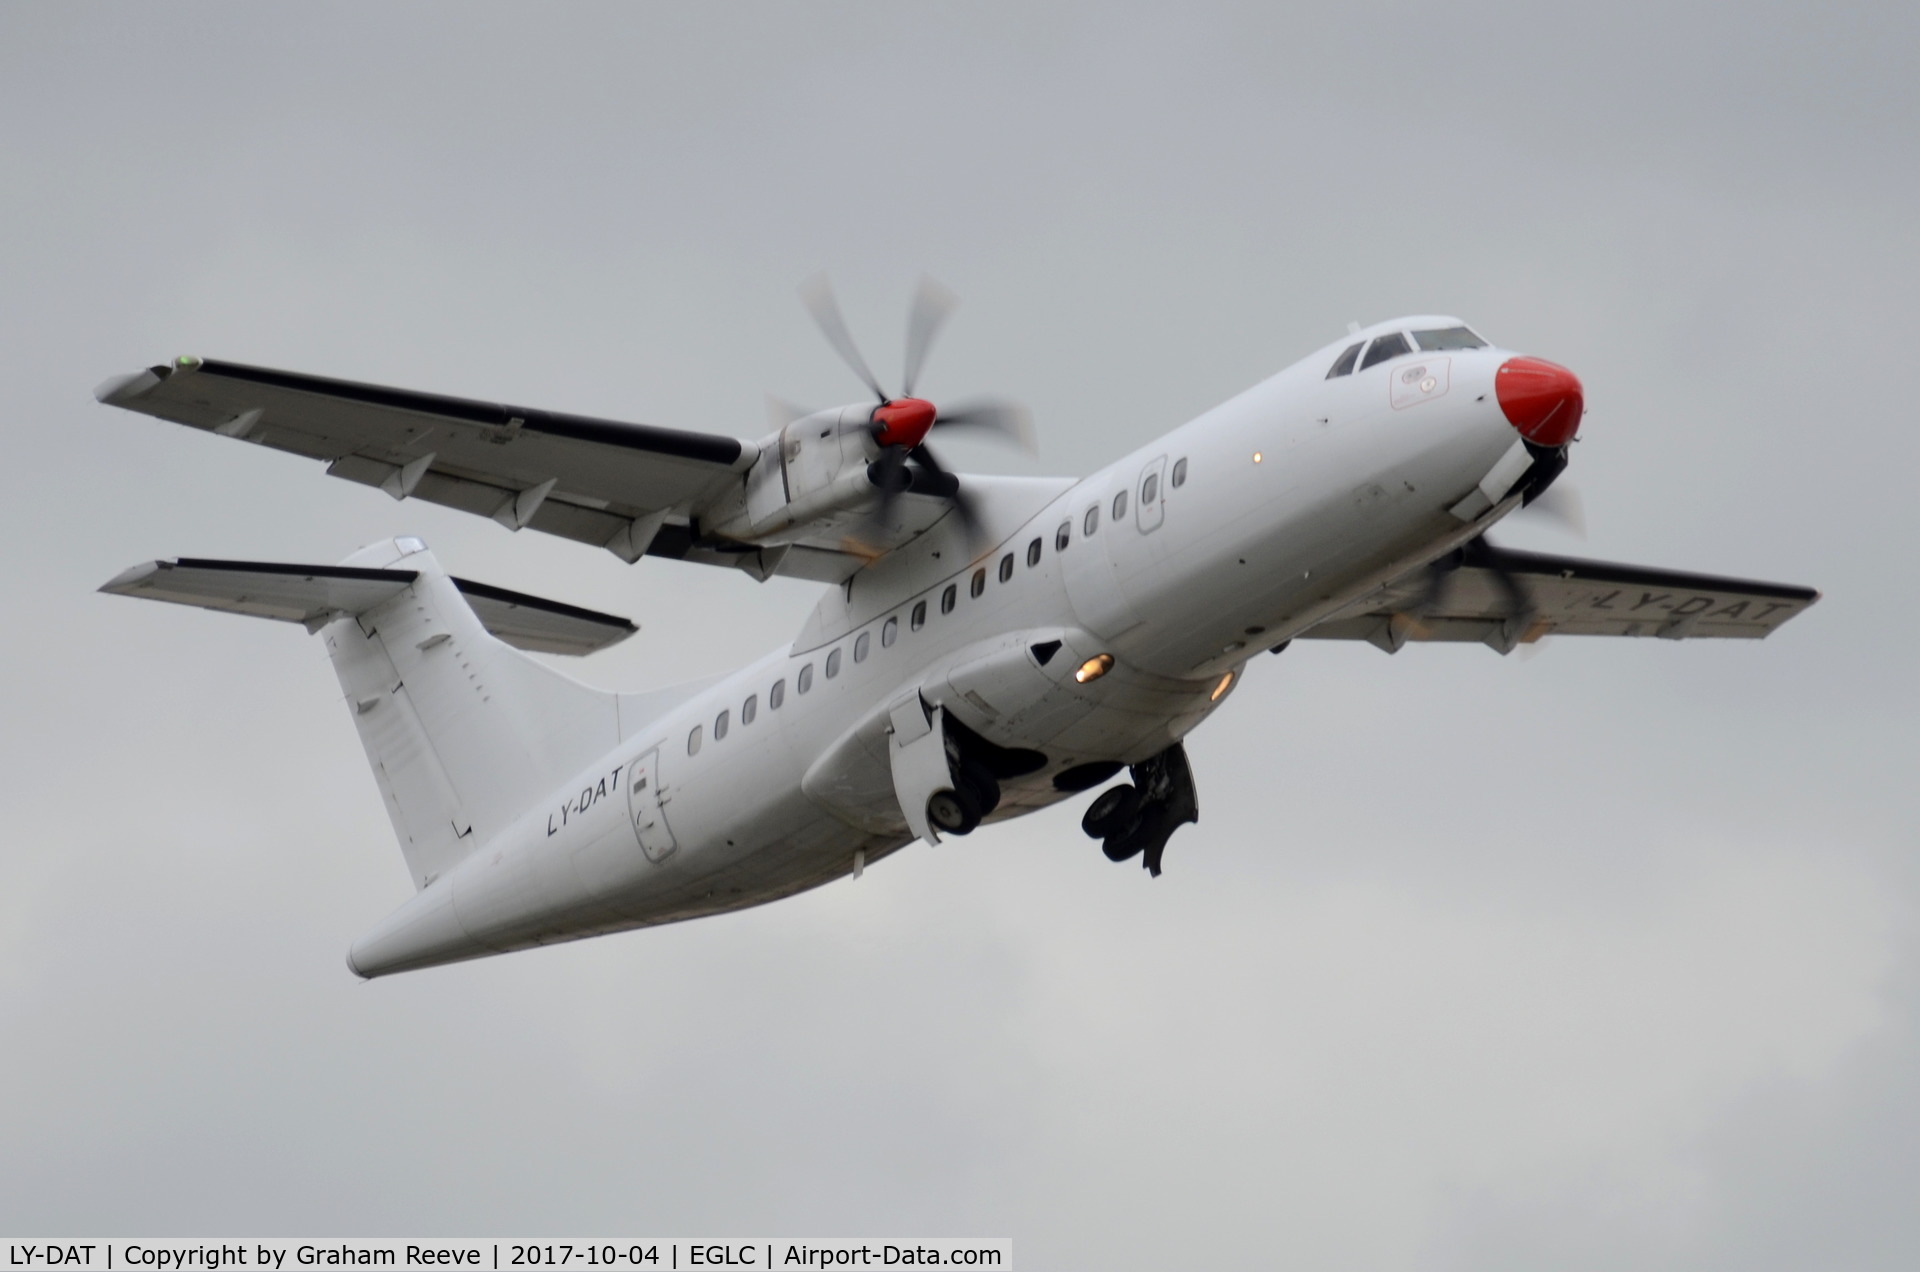 LY-DAT, 1994 ATR 42-500 C/N 445, Departing from London City Airport.